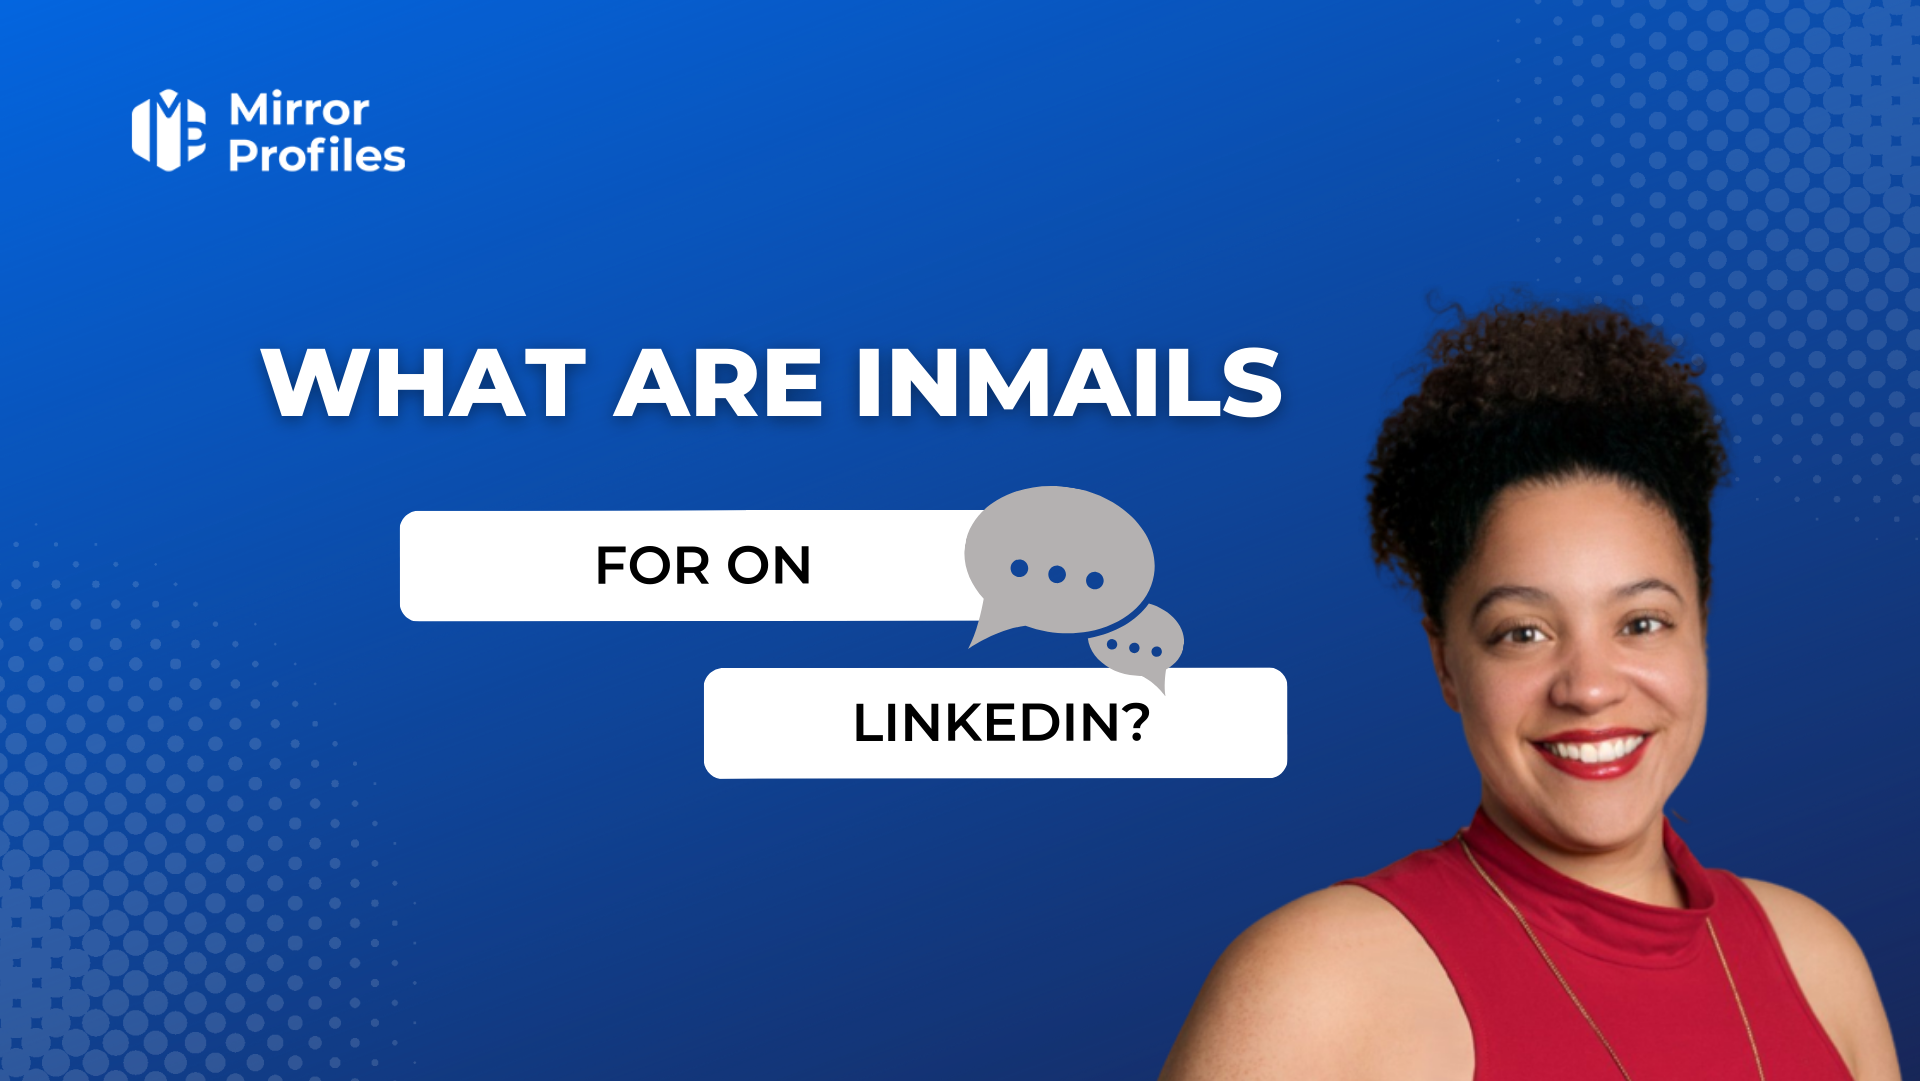 What are inmails for on Linkedin?